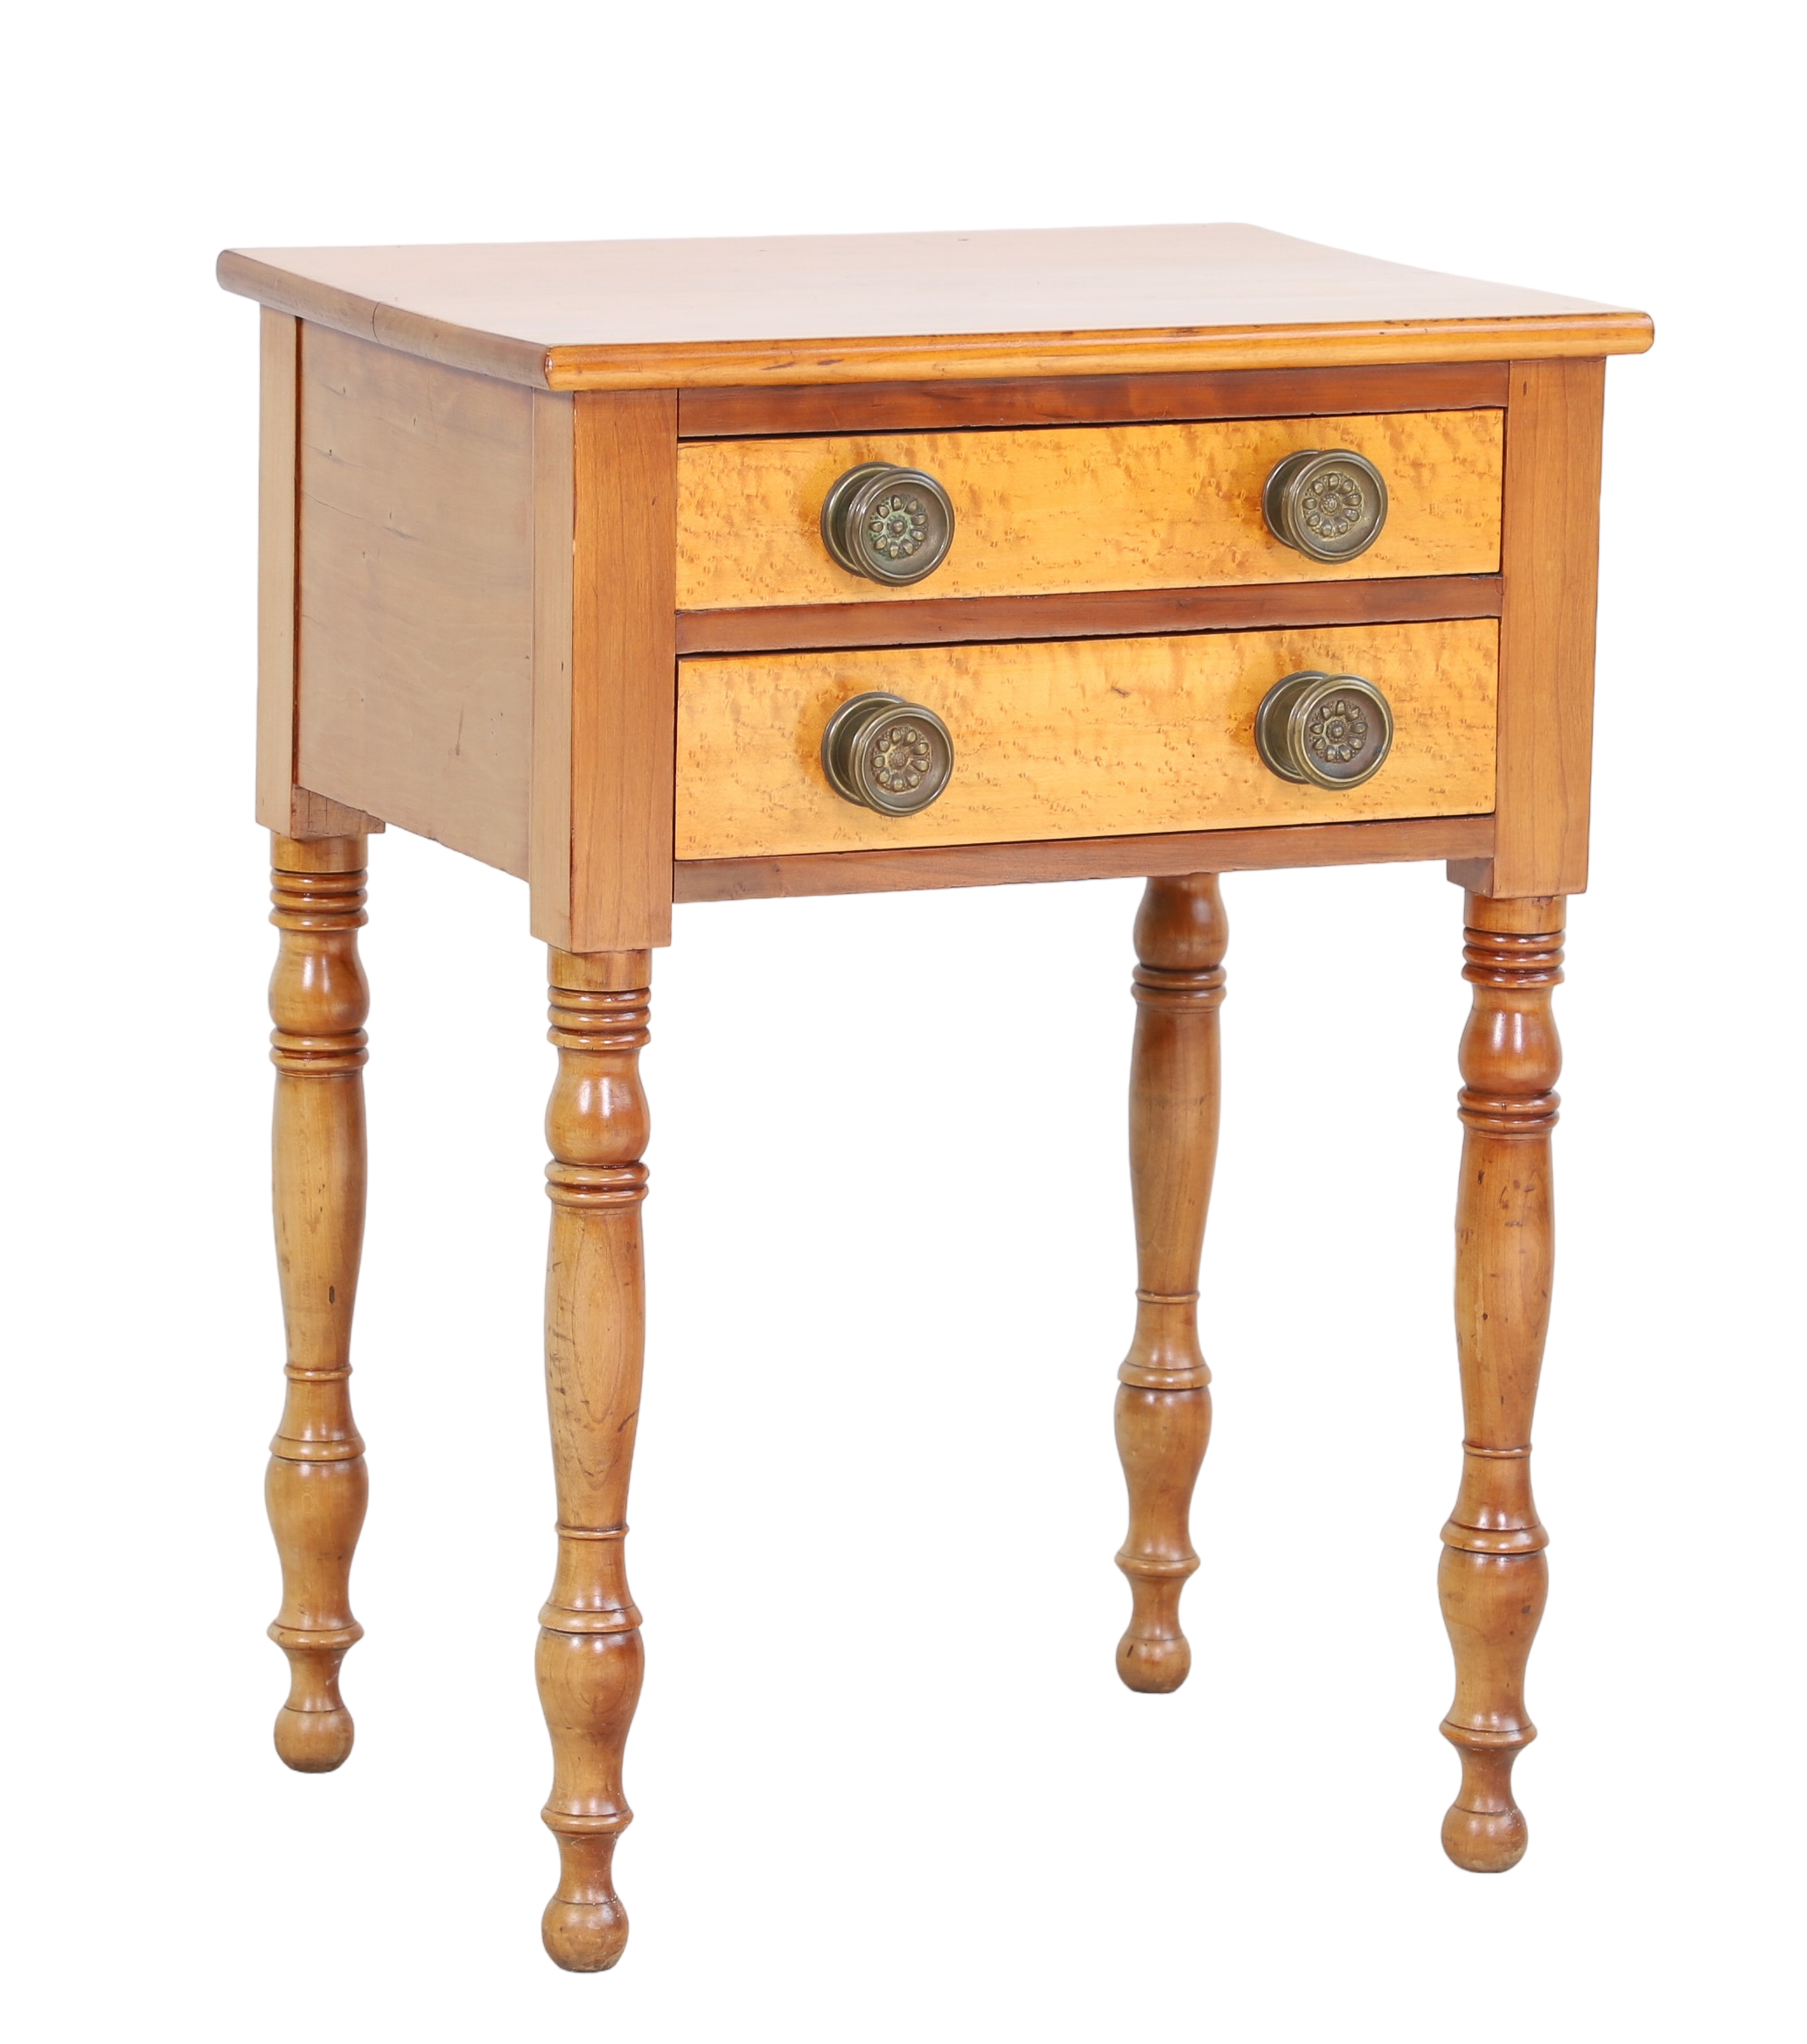 Sheraton style maple 2-drawer stand,